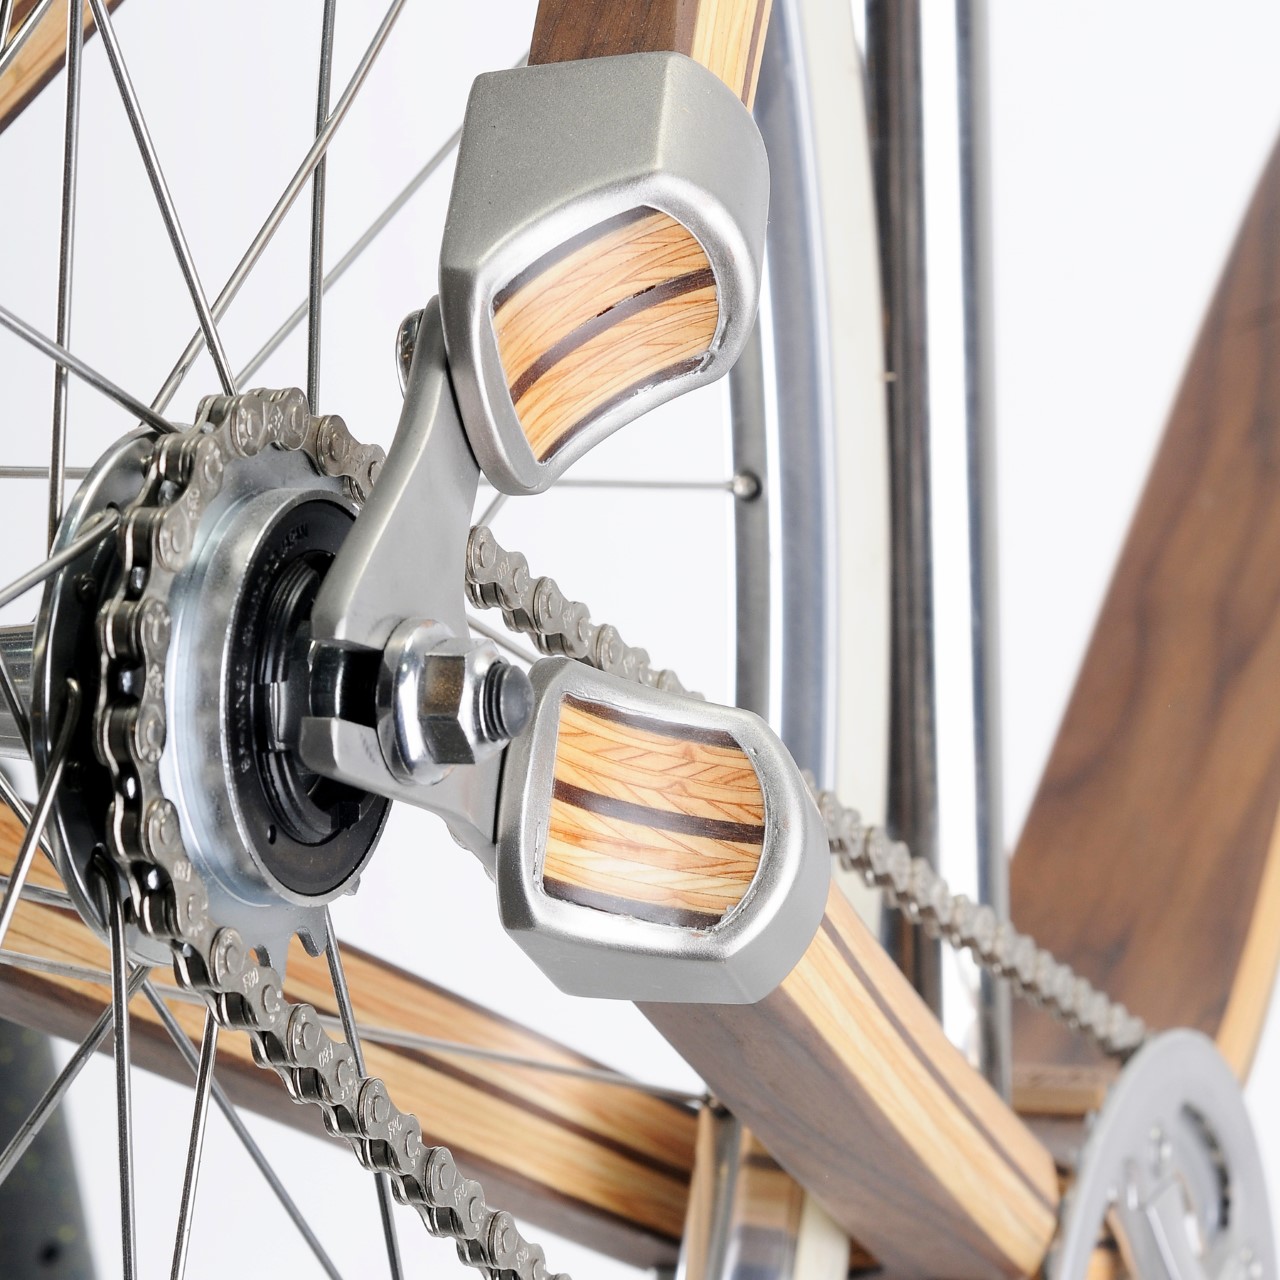 Is wood strong enough to make a bicycle frame? This award-winning 2-wheeler says yes